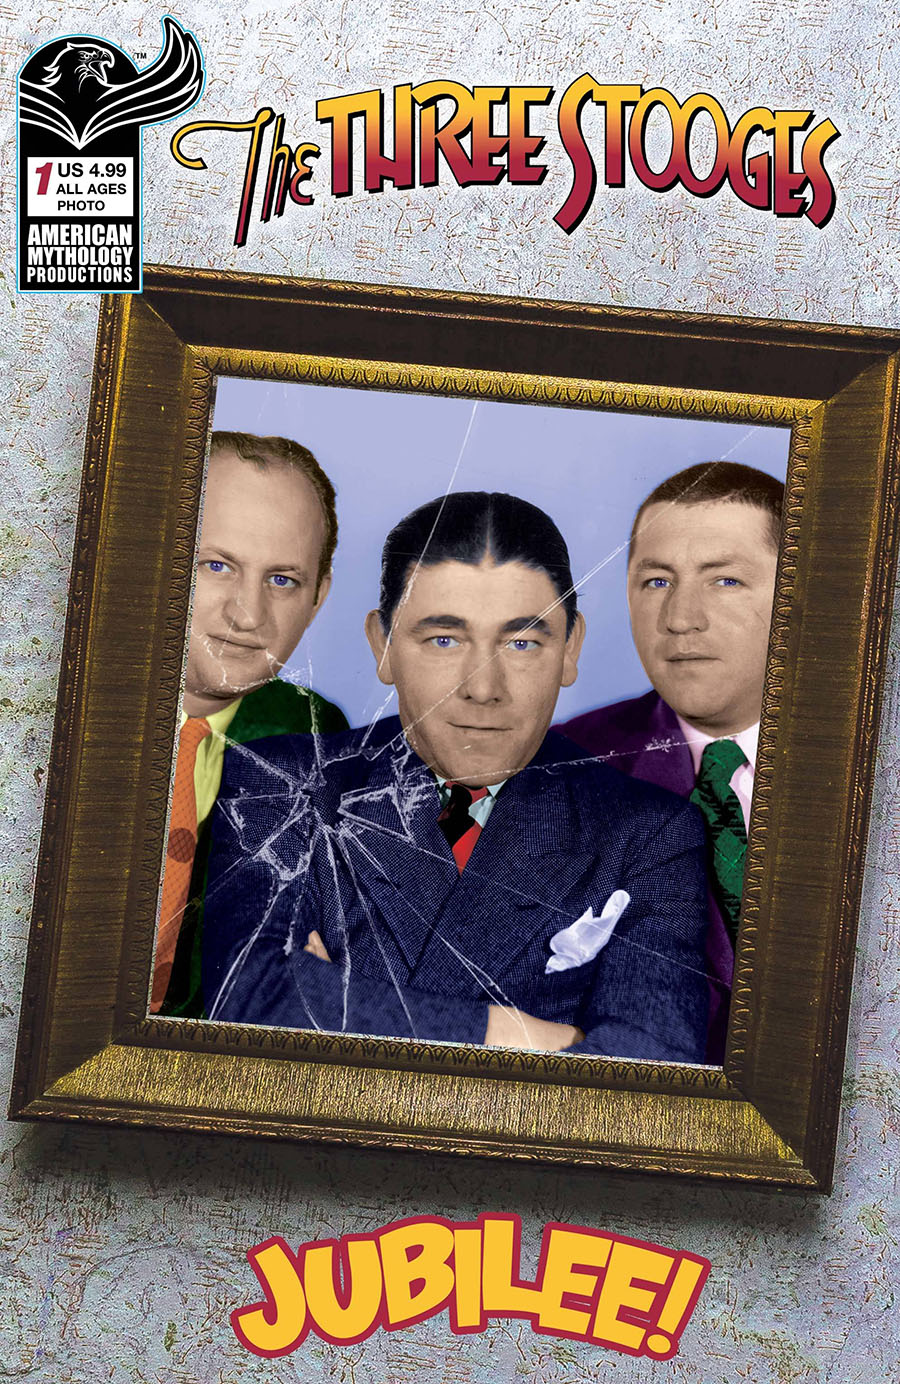 American Mythology Archives Three Stooges #1 1949 Jubilee Edition Cover B Variant Color Photo Cover